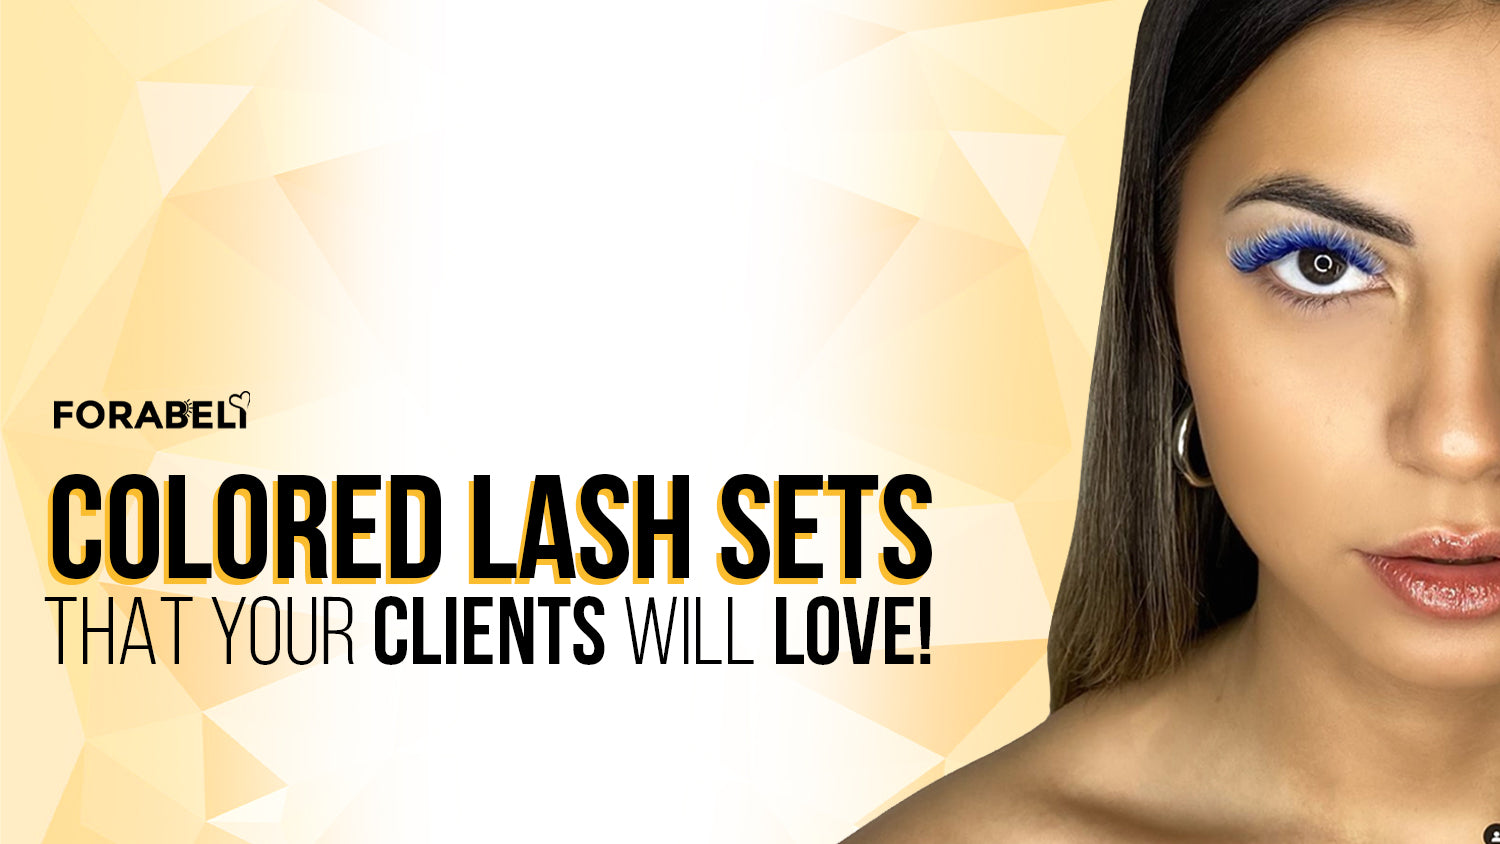 COLORED LASH SETS LOVE! YOUR CLIENTS WILL THAT Forabeli –